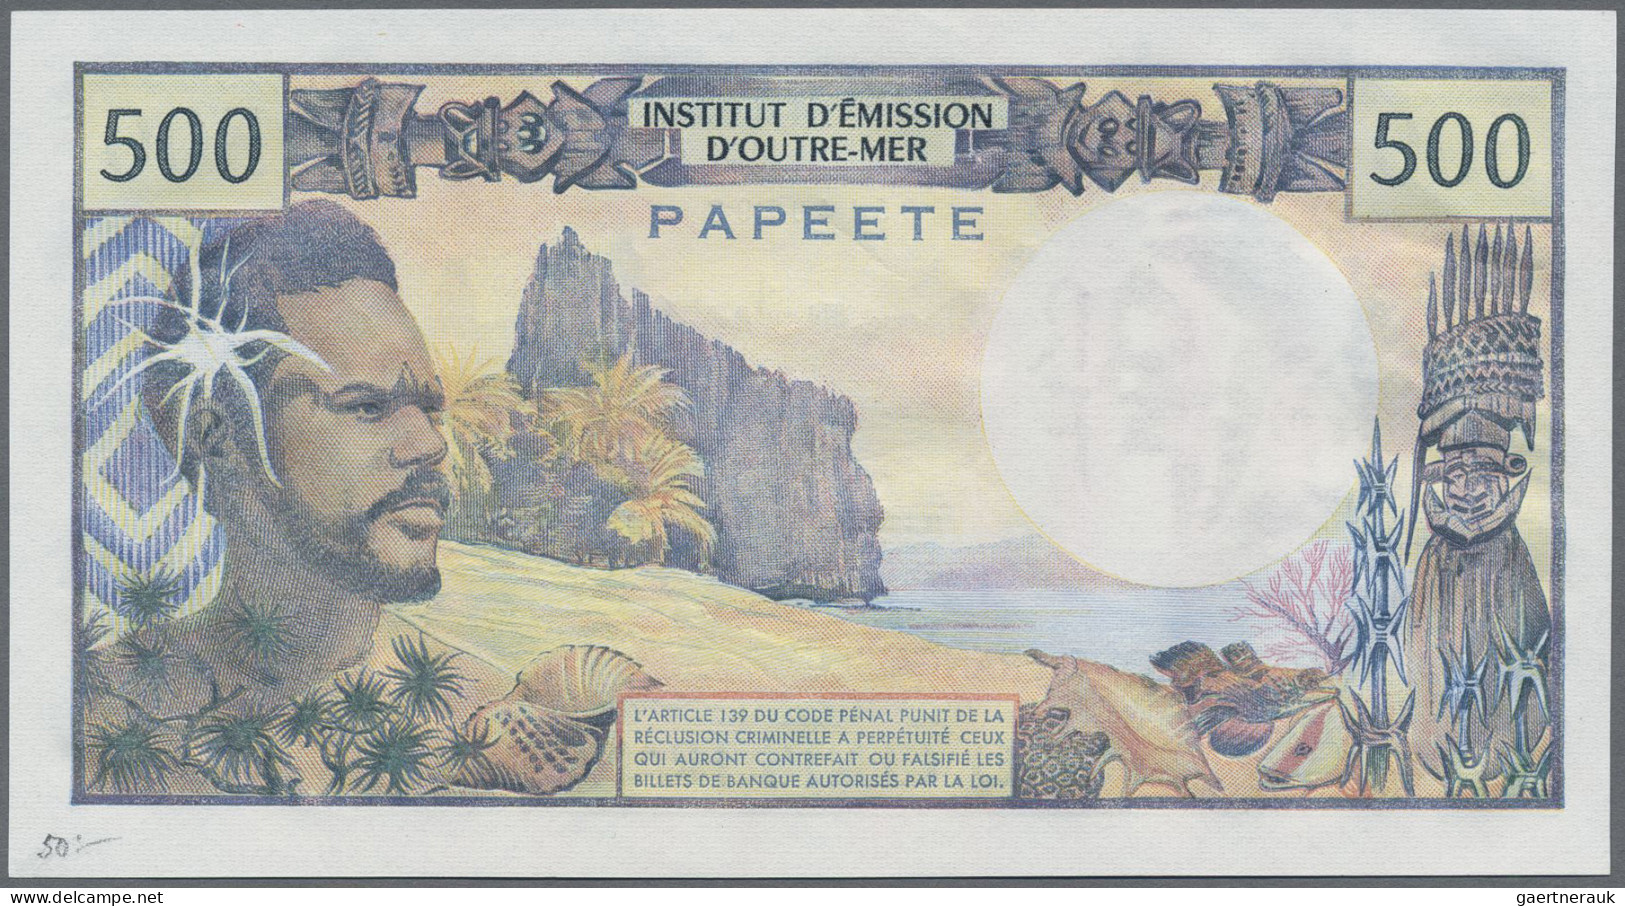 Tahiti: Institut D'Emission D'Outre-Mer – PAPEETE, Pair With 100 Francs ND(1973) - Sonstige – Ozeanien